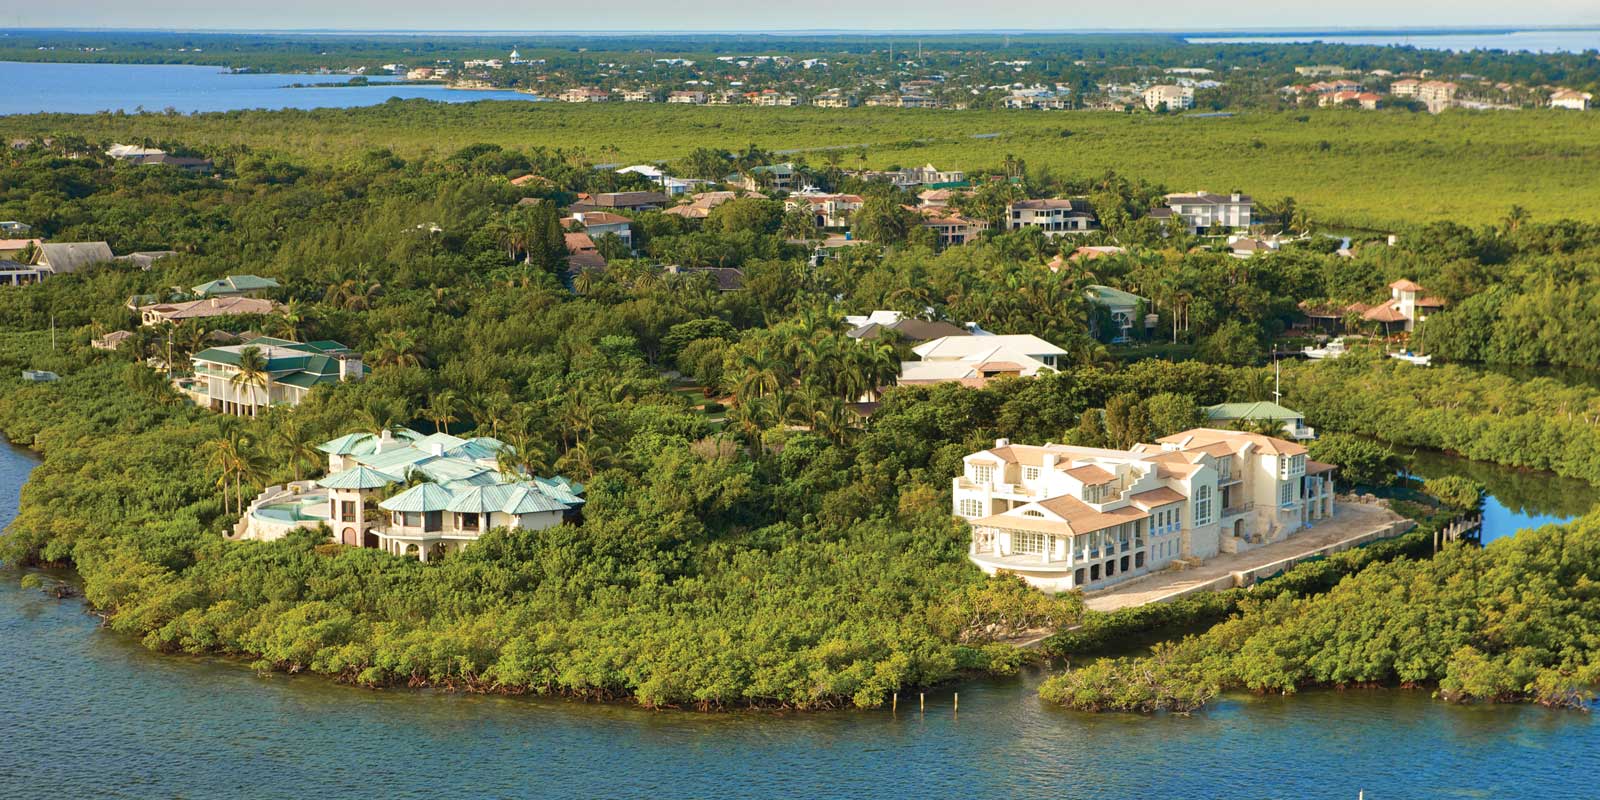 Ocean Reef Club Real Estate Company Life Style